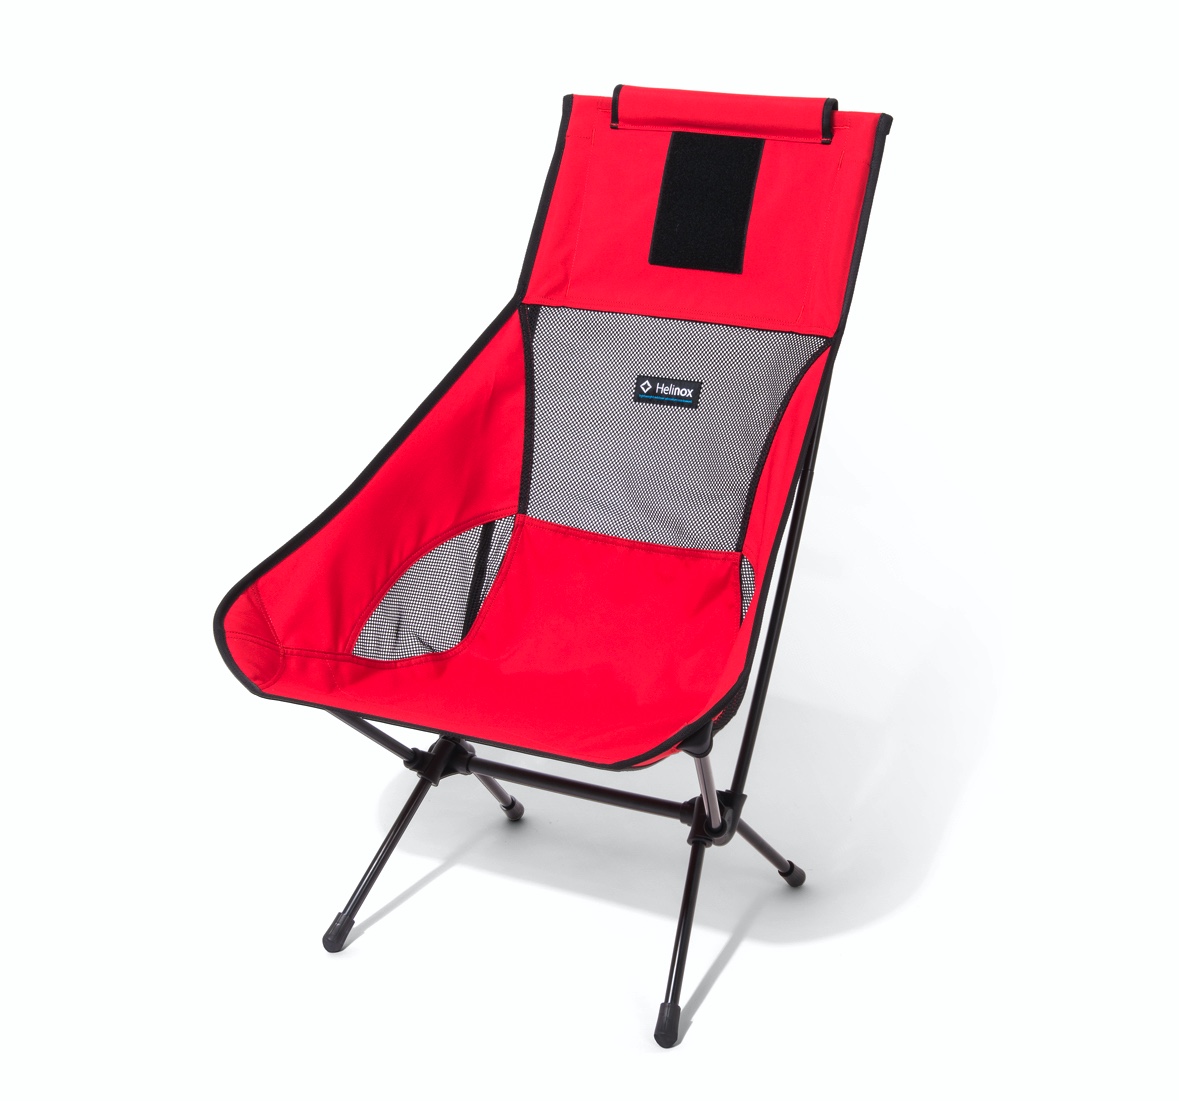 Helinox Chair 2 – camping chair review - Countryfile.com